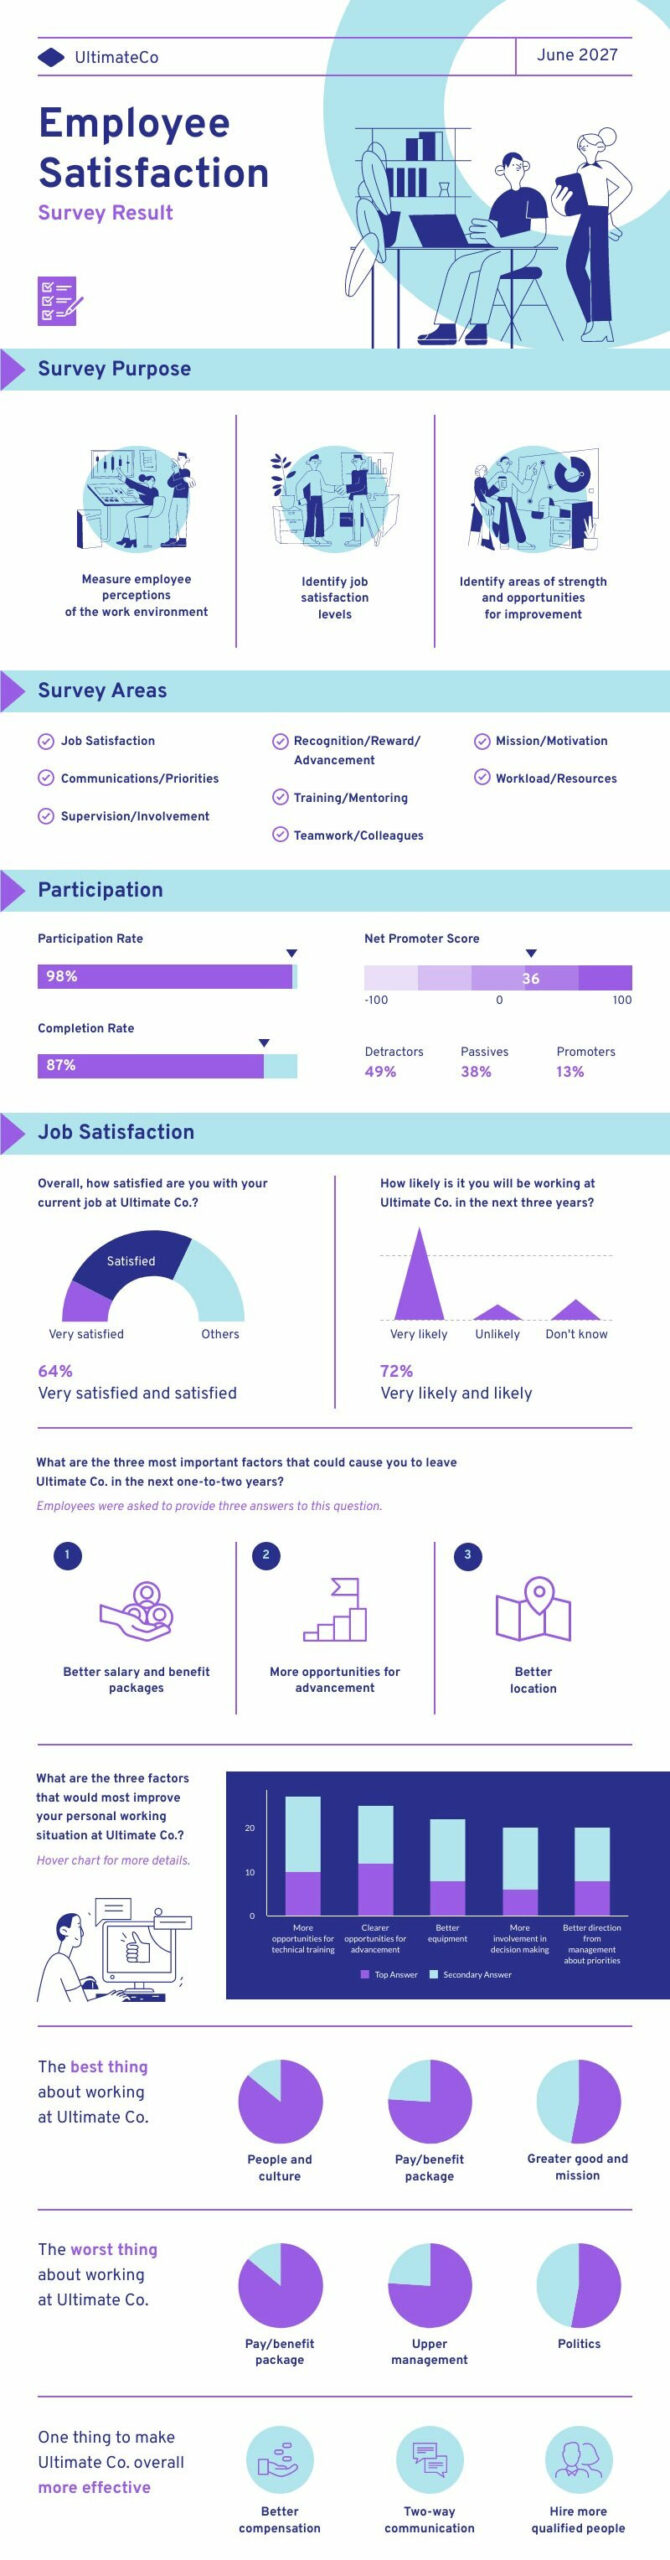 employee engagement survey result infographic template including employee job satisfaction result